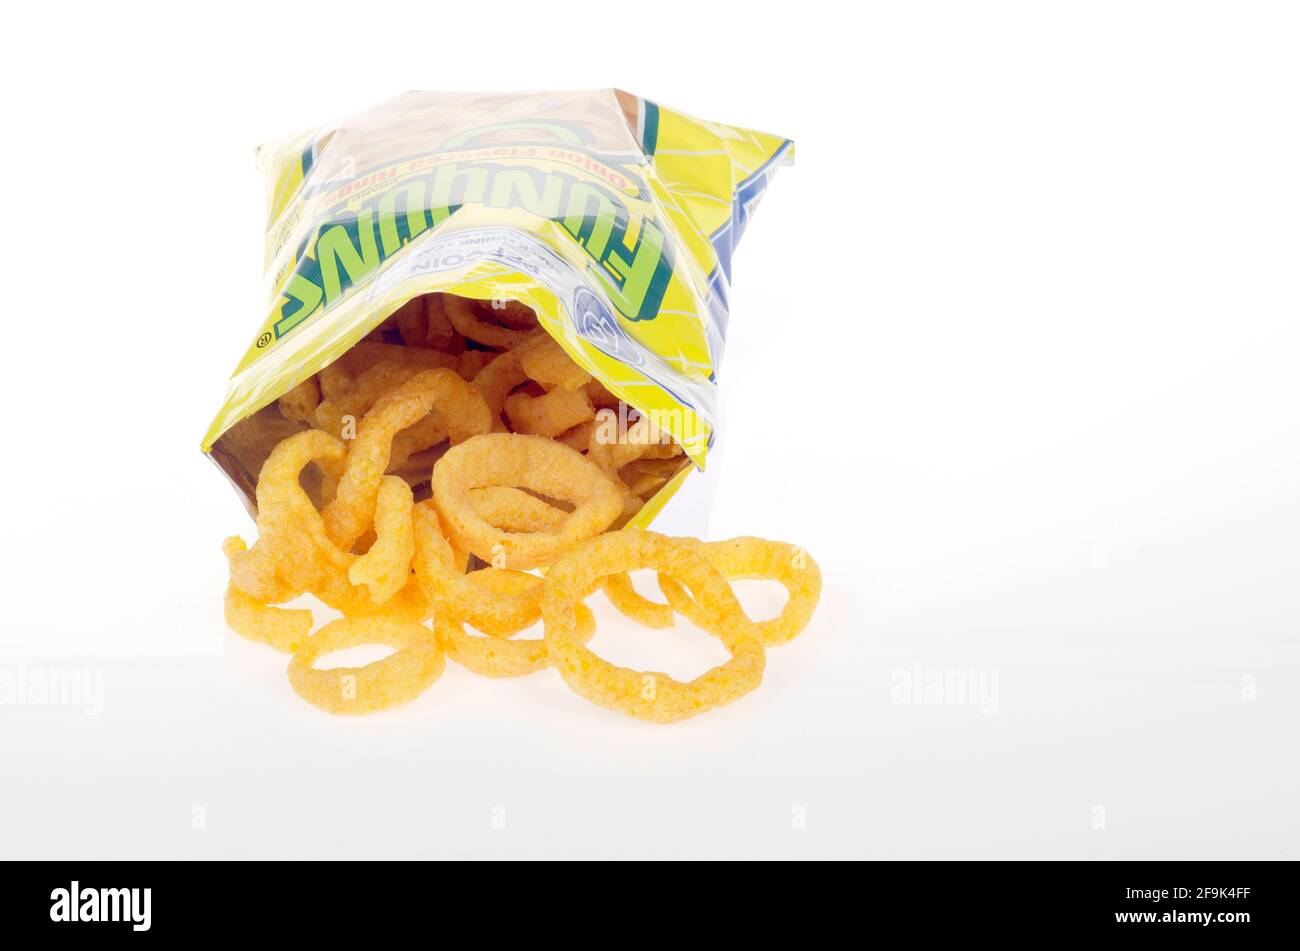 Funyuns Onion Flavored Rings Snack Bag Stock Photo